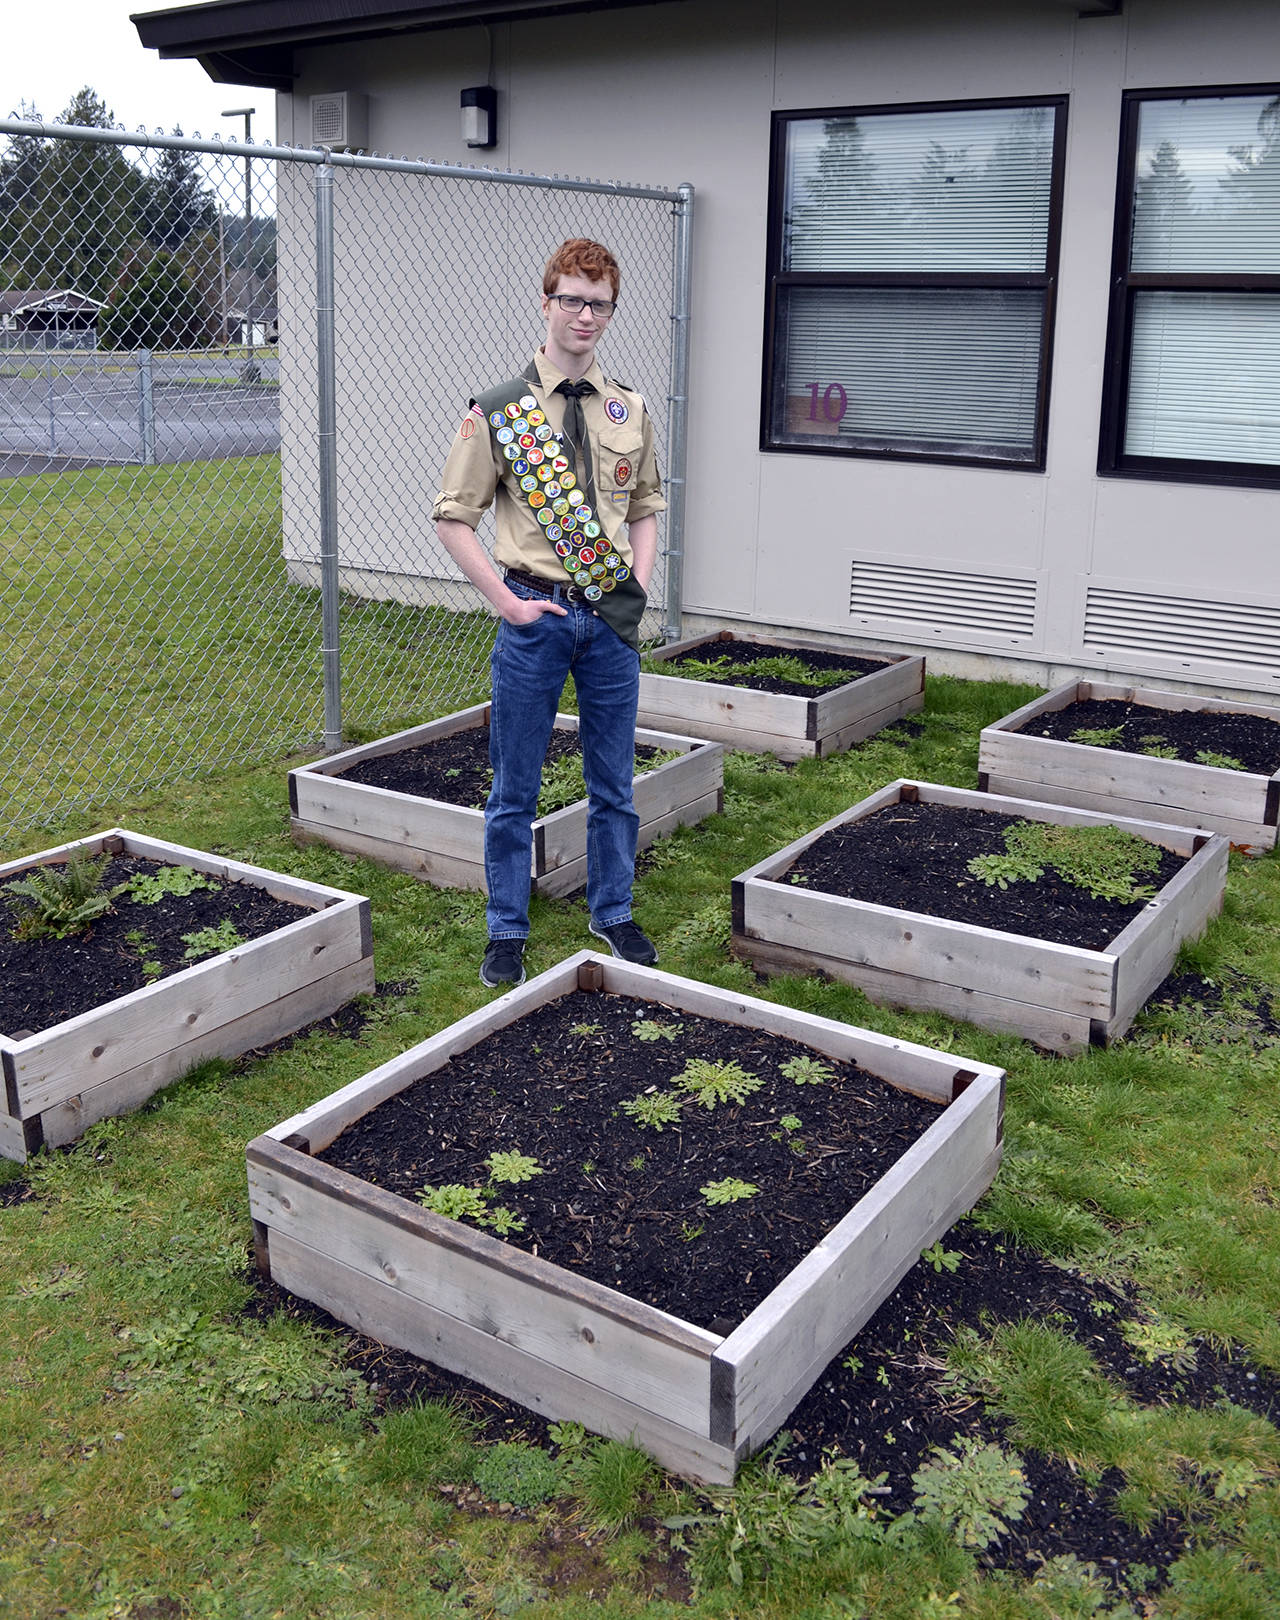 (Photo courtesy Erwin family) Jared Erwin built six raised garden beds for Central Park Elementary School in Aberdeen, which the kindergarten class uses as part of its science curriculum.